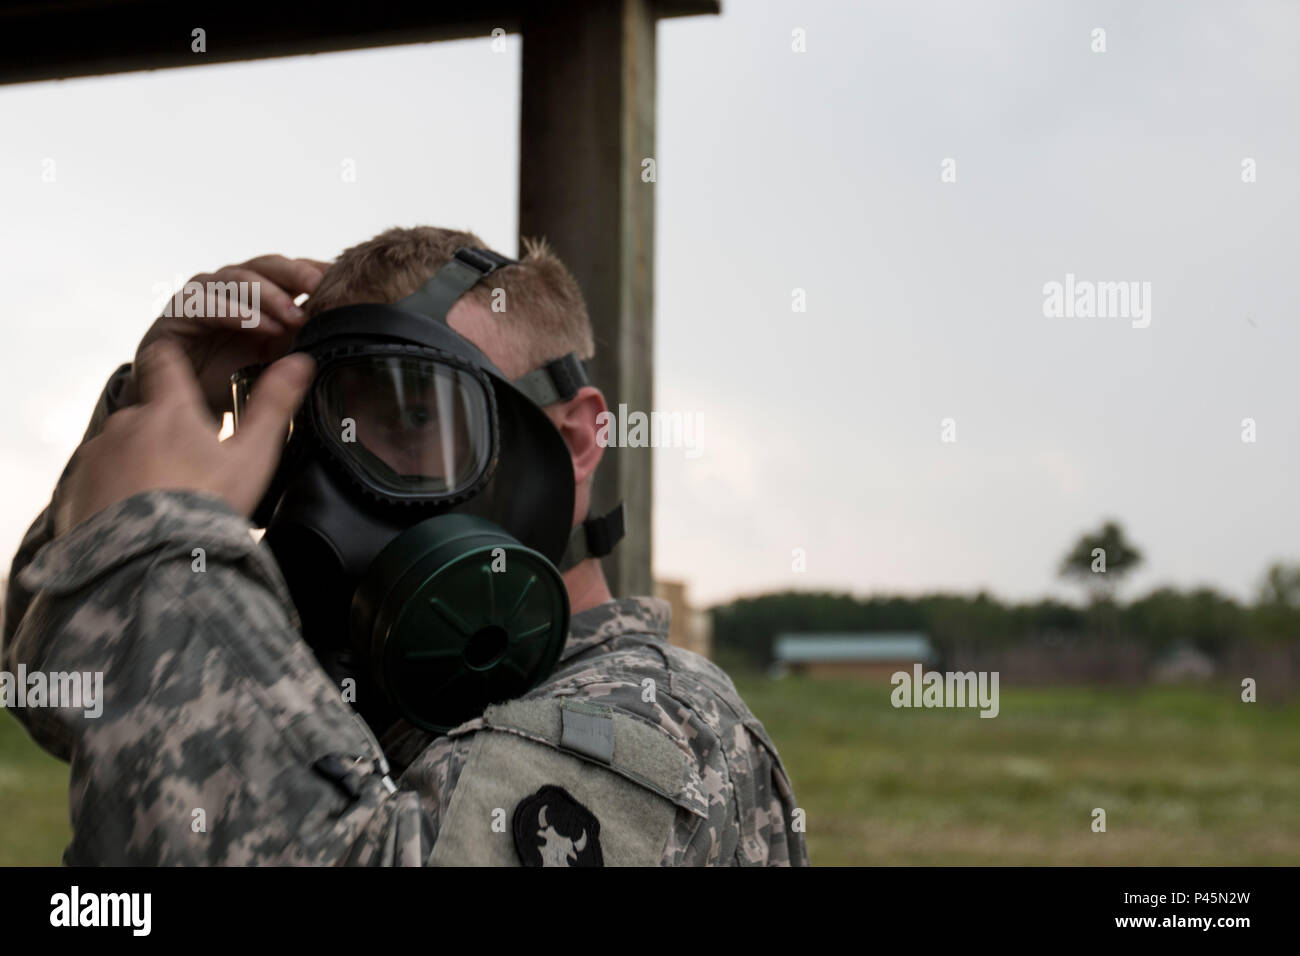 A Soldier with Headquarters Support Company, 834th Aviation Support Battalion prepares to go into the gas chamber for a nuclear, biological, and chemical training exercise at Camp Ripley, Minn., on June 17, 2016. CS gas is used for the training and is a tear gas. (Minnesota National Guard photo by Sgt. Sebastian Nemec, 34th Combat Aviation Brigade Public Affairs NCO) Stock Photo